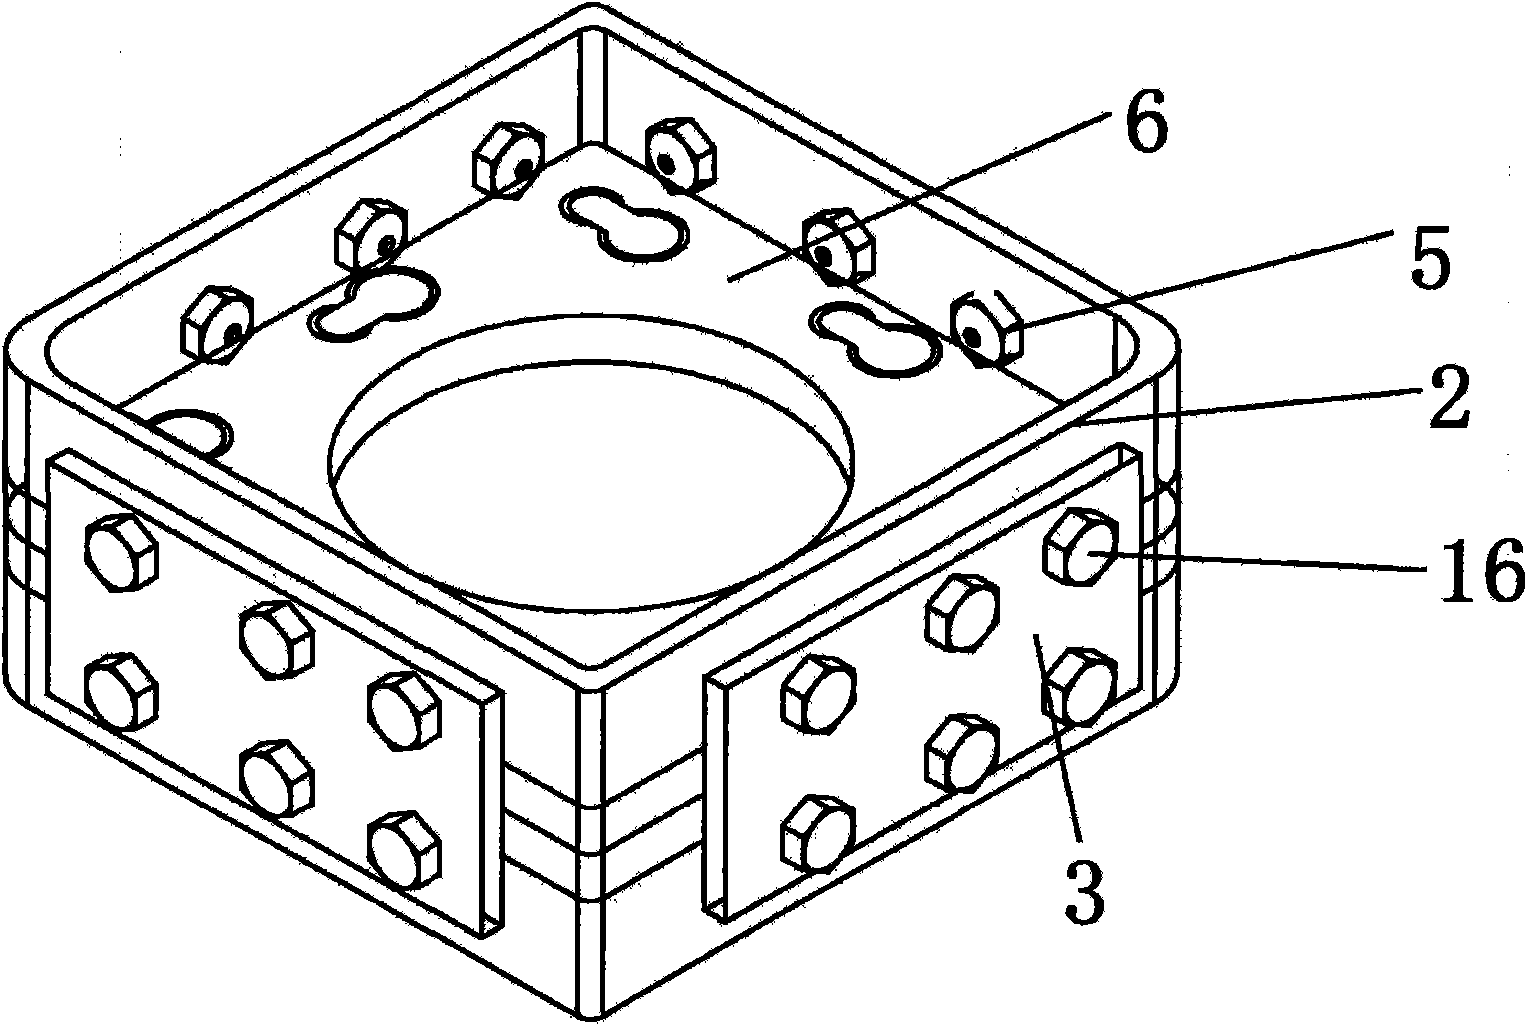 Mechanical connection structure and construction method for splicing precast square piles